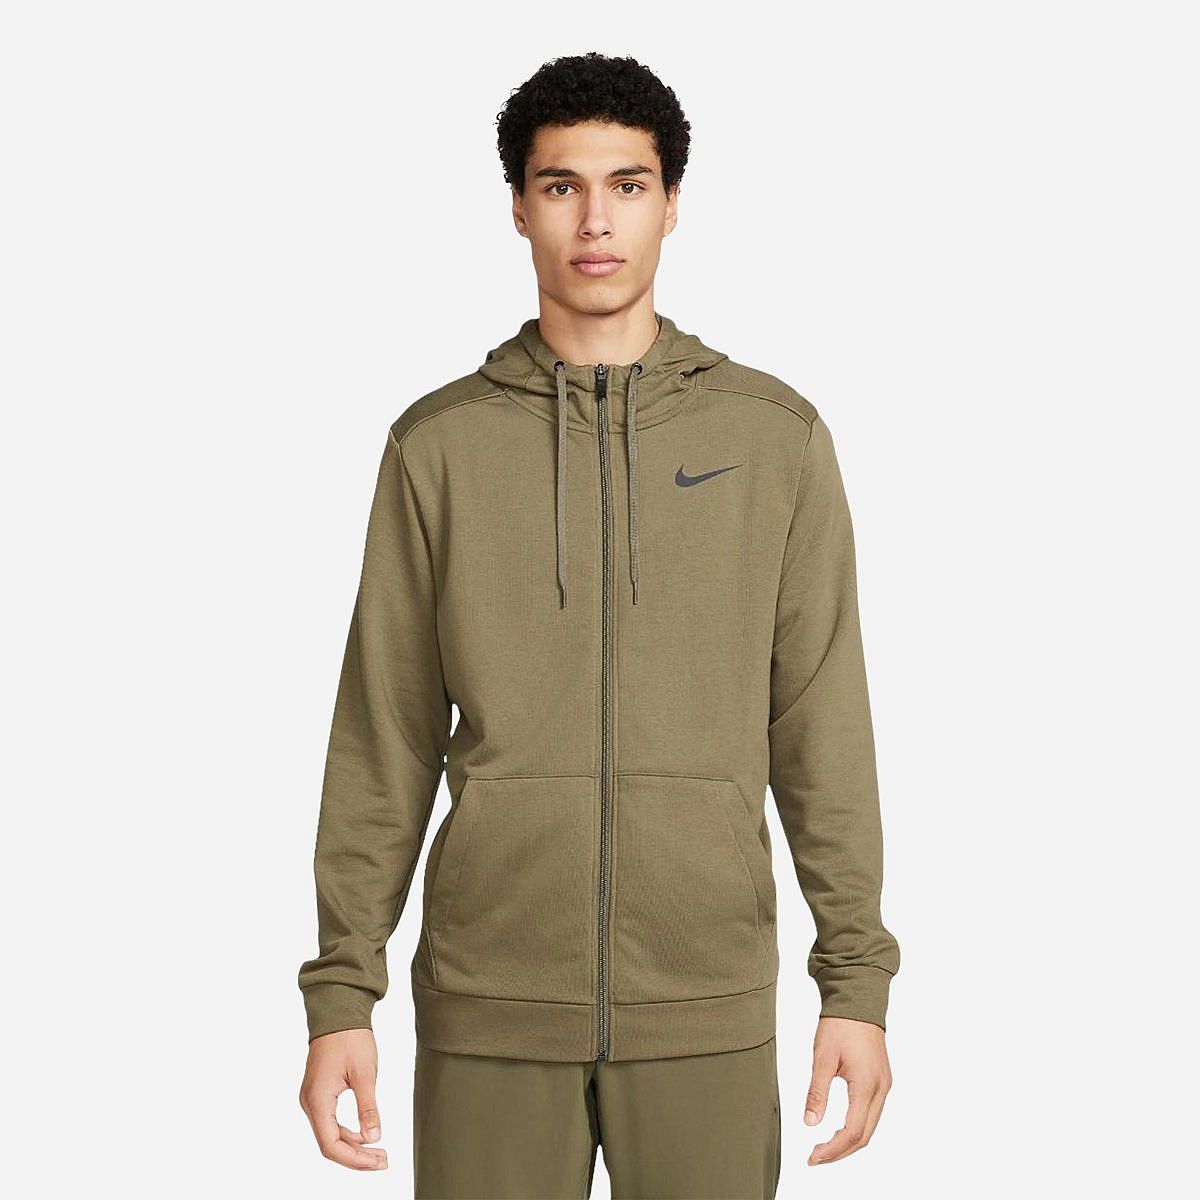 AN309388 Dry Heren Dri-fit Hooded Fitne